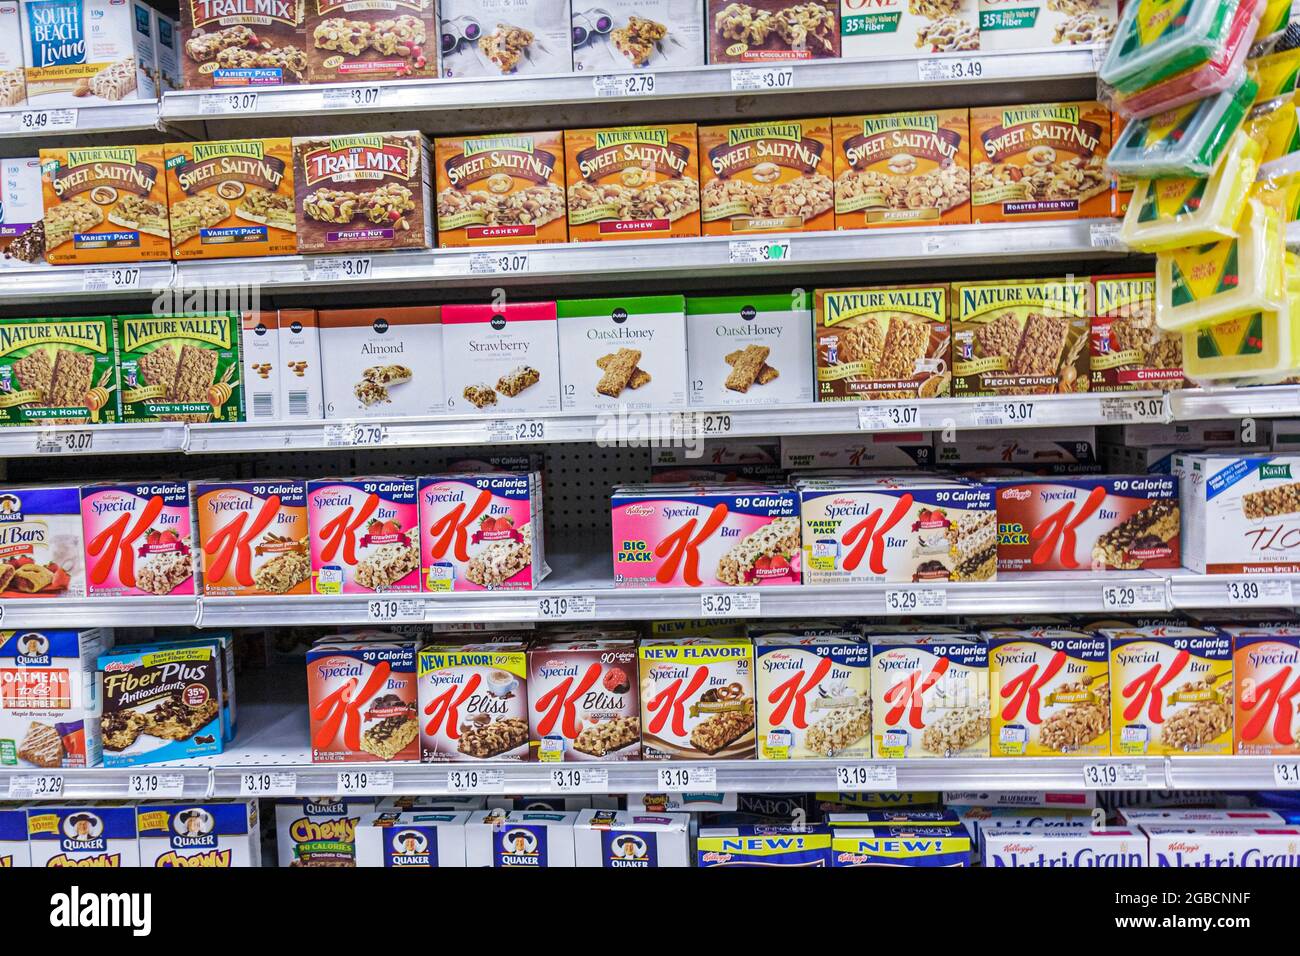 Miami Beach Florida,Publix Grocery Store supermarket,shelves display sale competing brands cereal bars,Kellogg’s store brand Nature Valley grain fiber Stock Photo